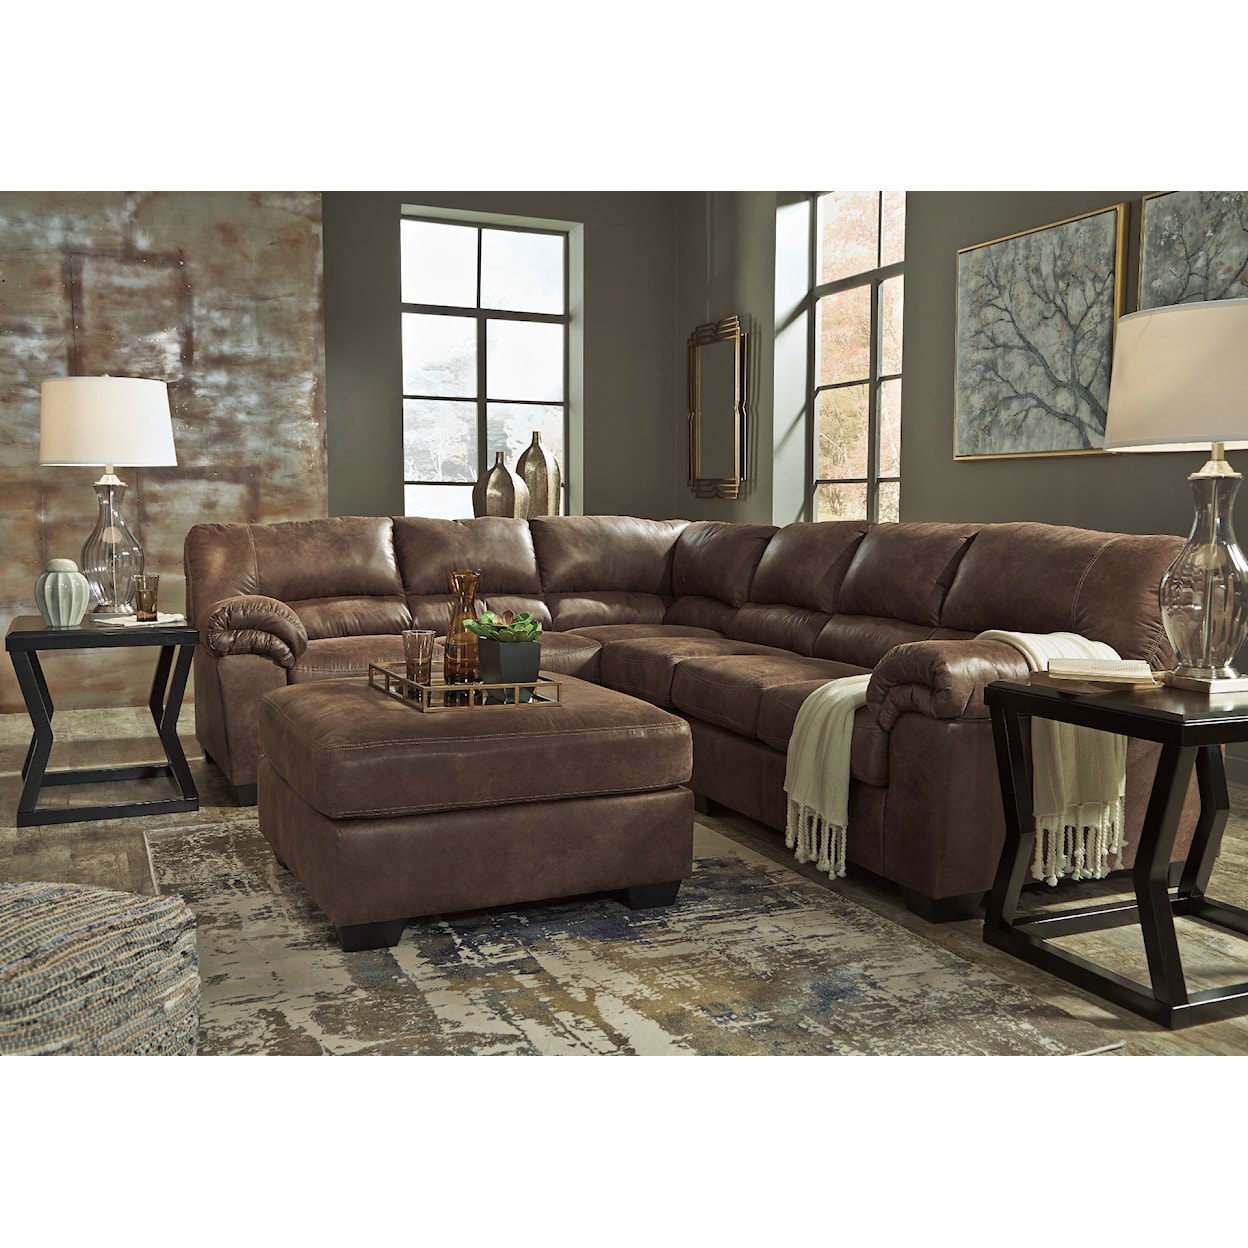 Benchcraft Bladen 3-Piece Sectional with Ottoman